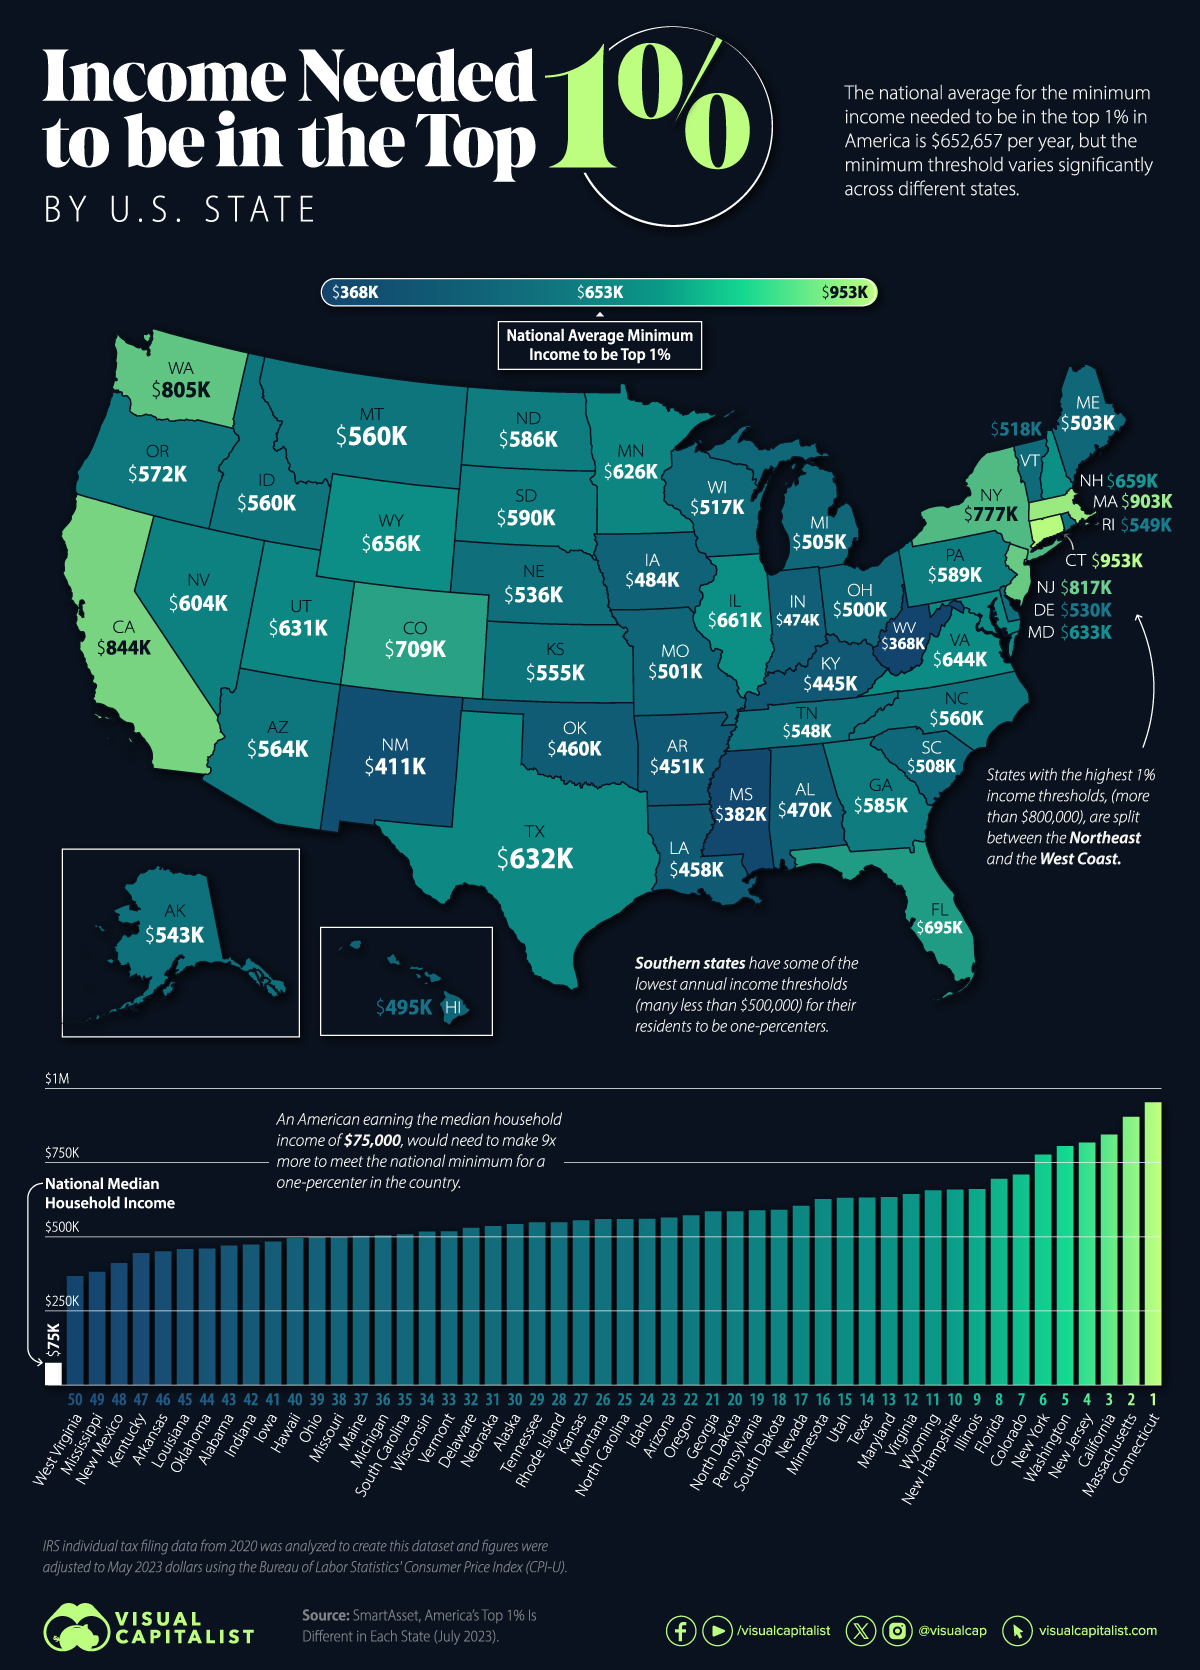 A map of the U.S. listing the annual income needed to be in the top 1% in each state.